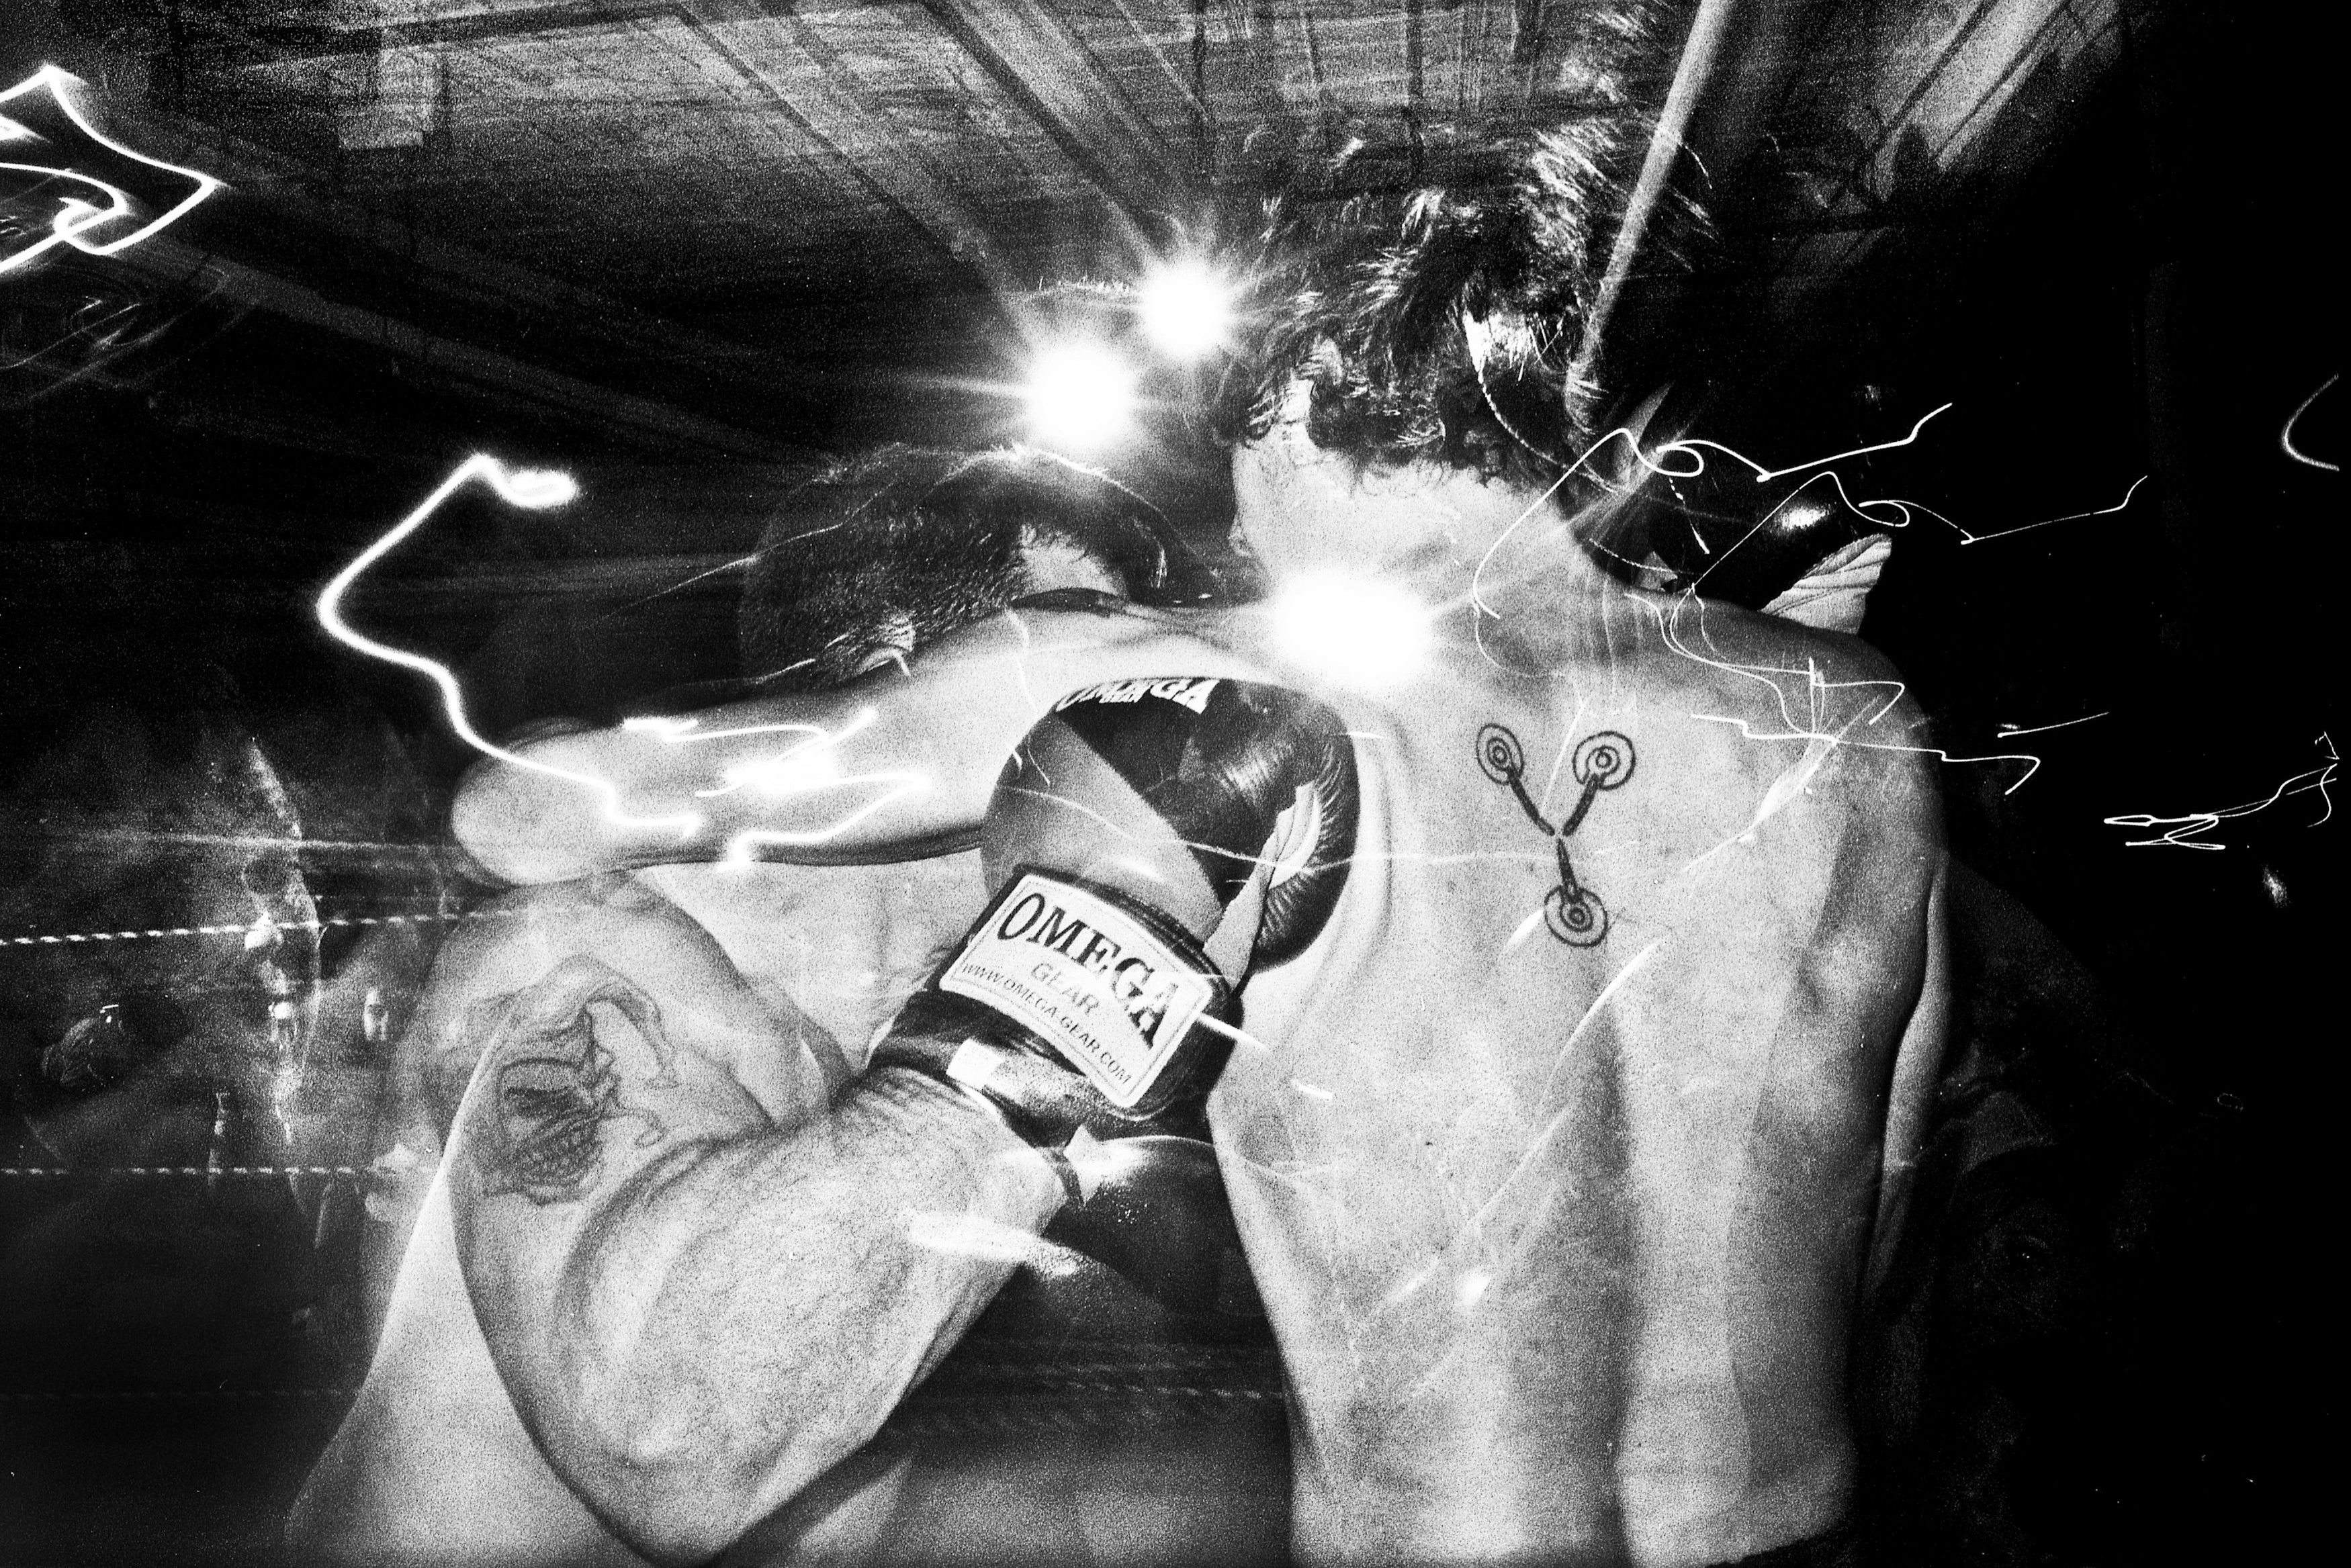 Boxers locked up in the midst of fighting, Luke Todd vs Anthony. (Lower East Side loft space, November, 2011)